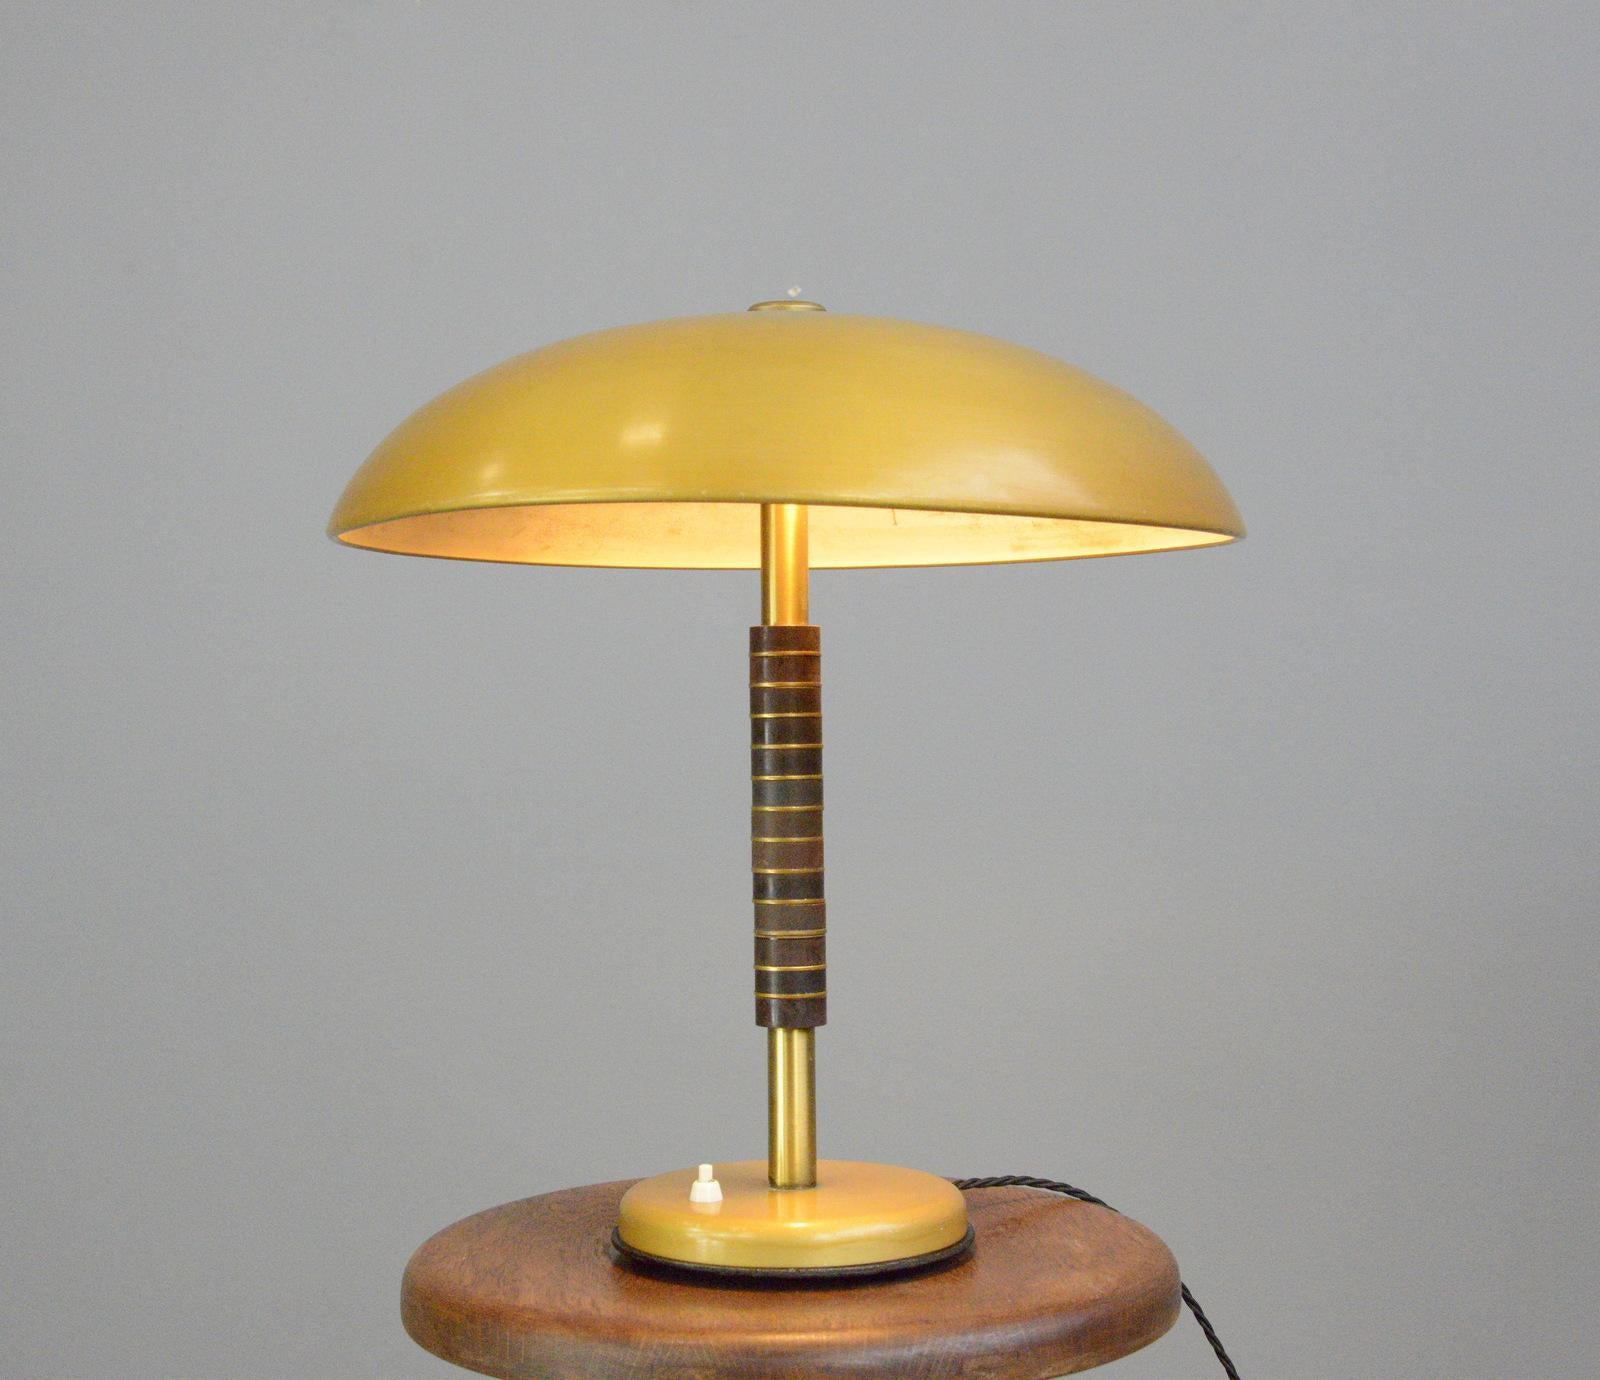 Gold table lamp by SBF Circa 1940s

- Steel shade with original gold paint
- Bakelite stem
- On/Off switch on the base
- Takes E27 fitting bulbs
- Made by SBF Sächsische Broncewarenfabrik
- German ~ 1940s
- Measures: 42cm wide x 44cm